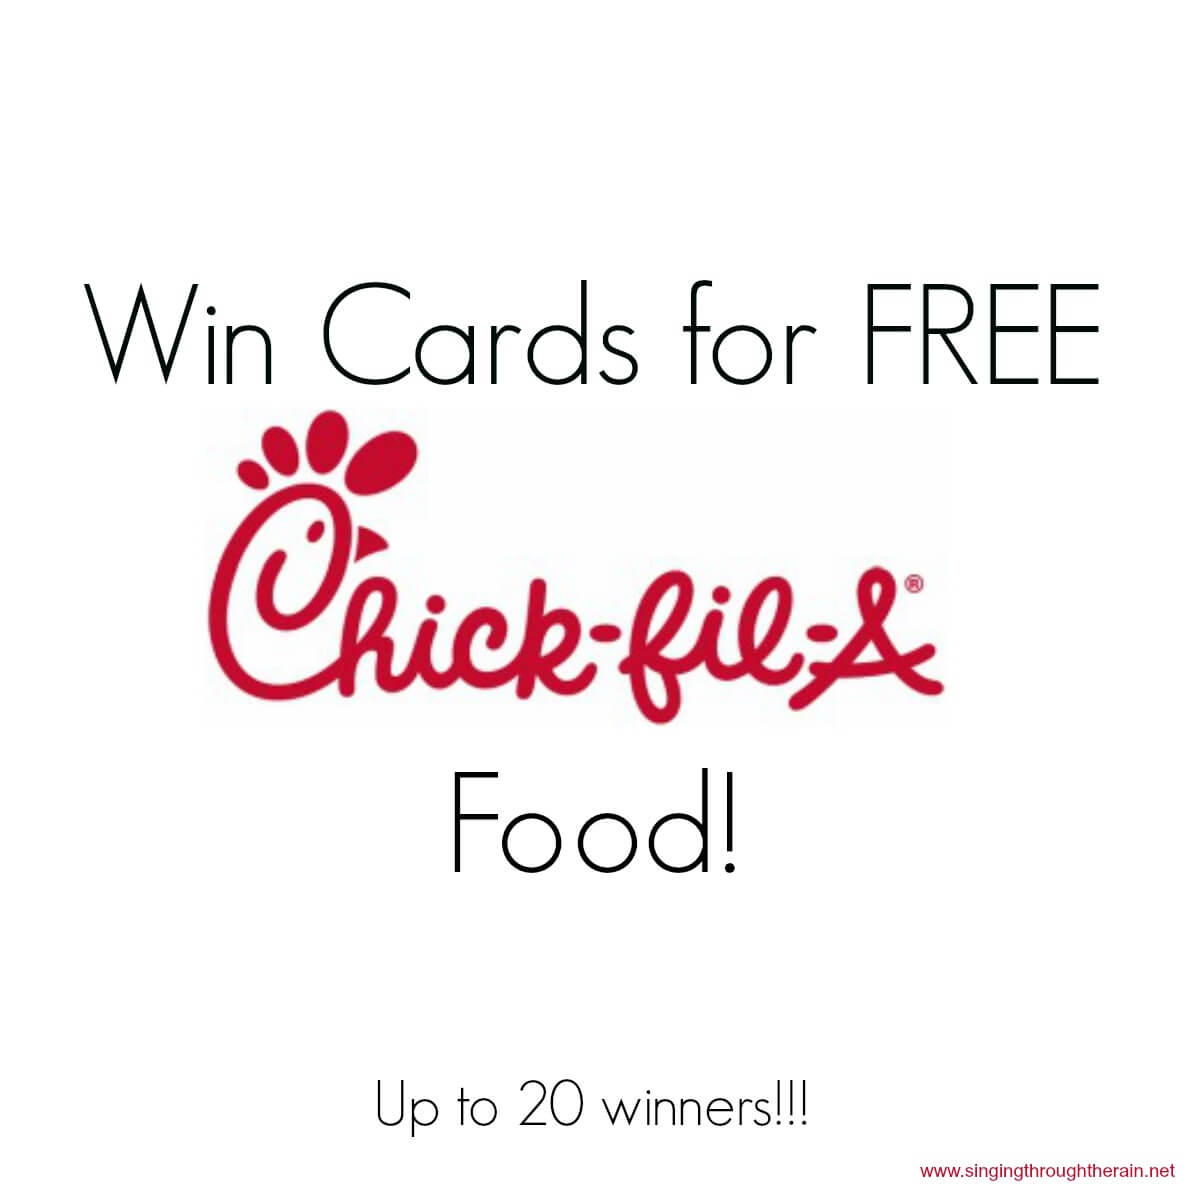 Win Cards for FREE Chick-fil-A Food!!